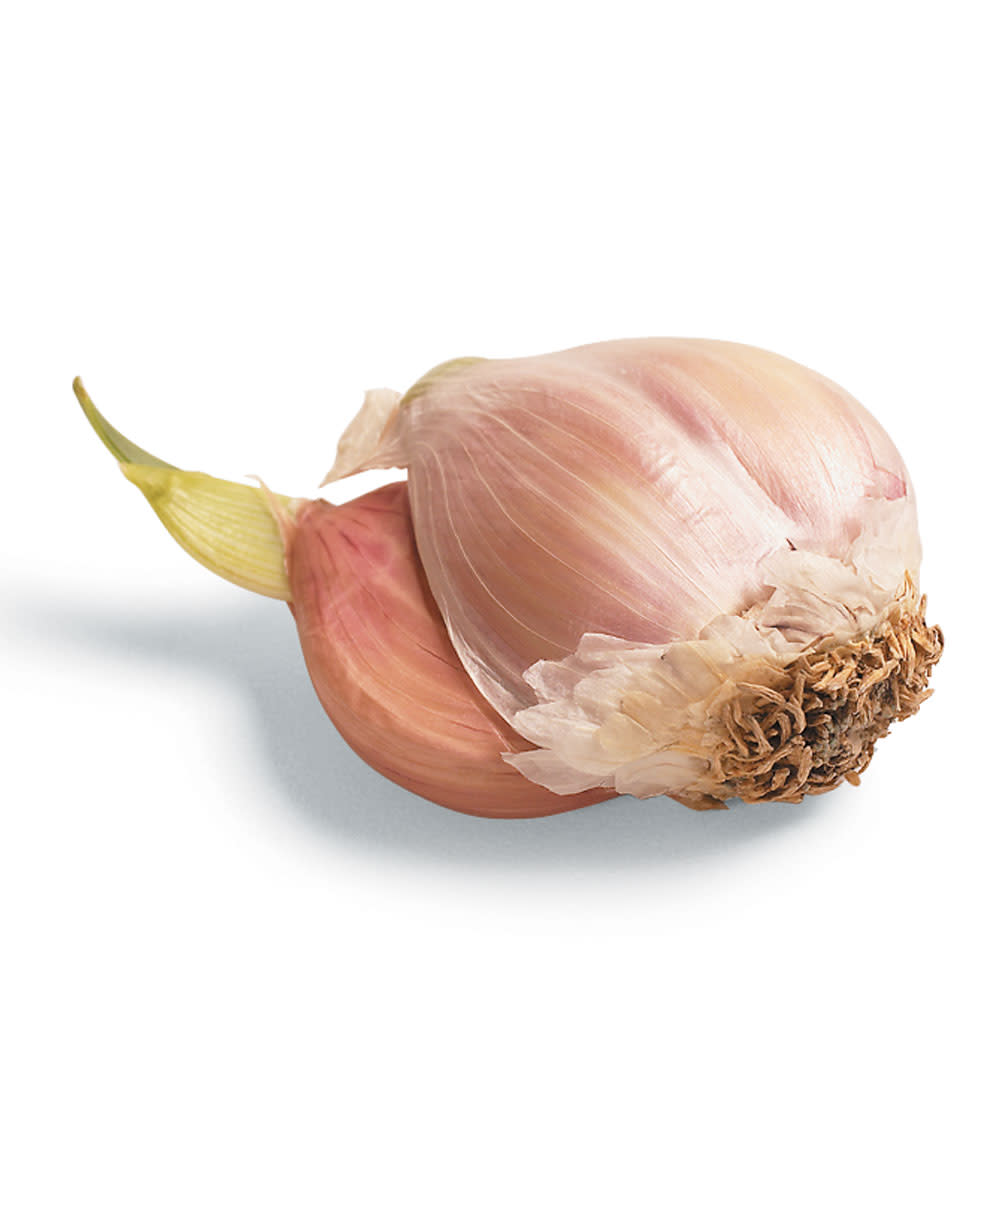 Tips-Remove-Germ-from-Garlic-to-Improve-Flavor